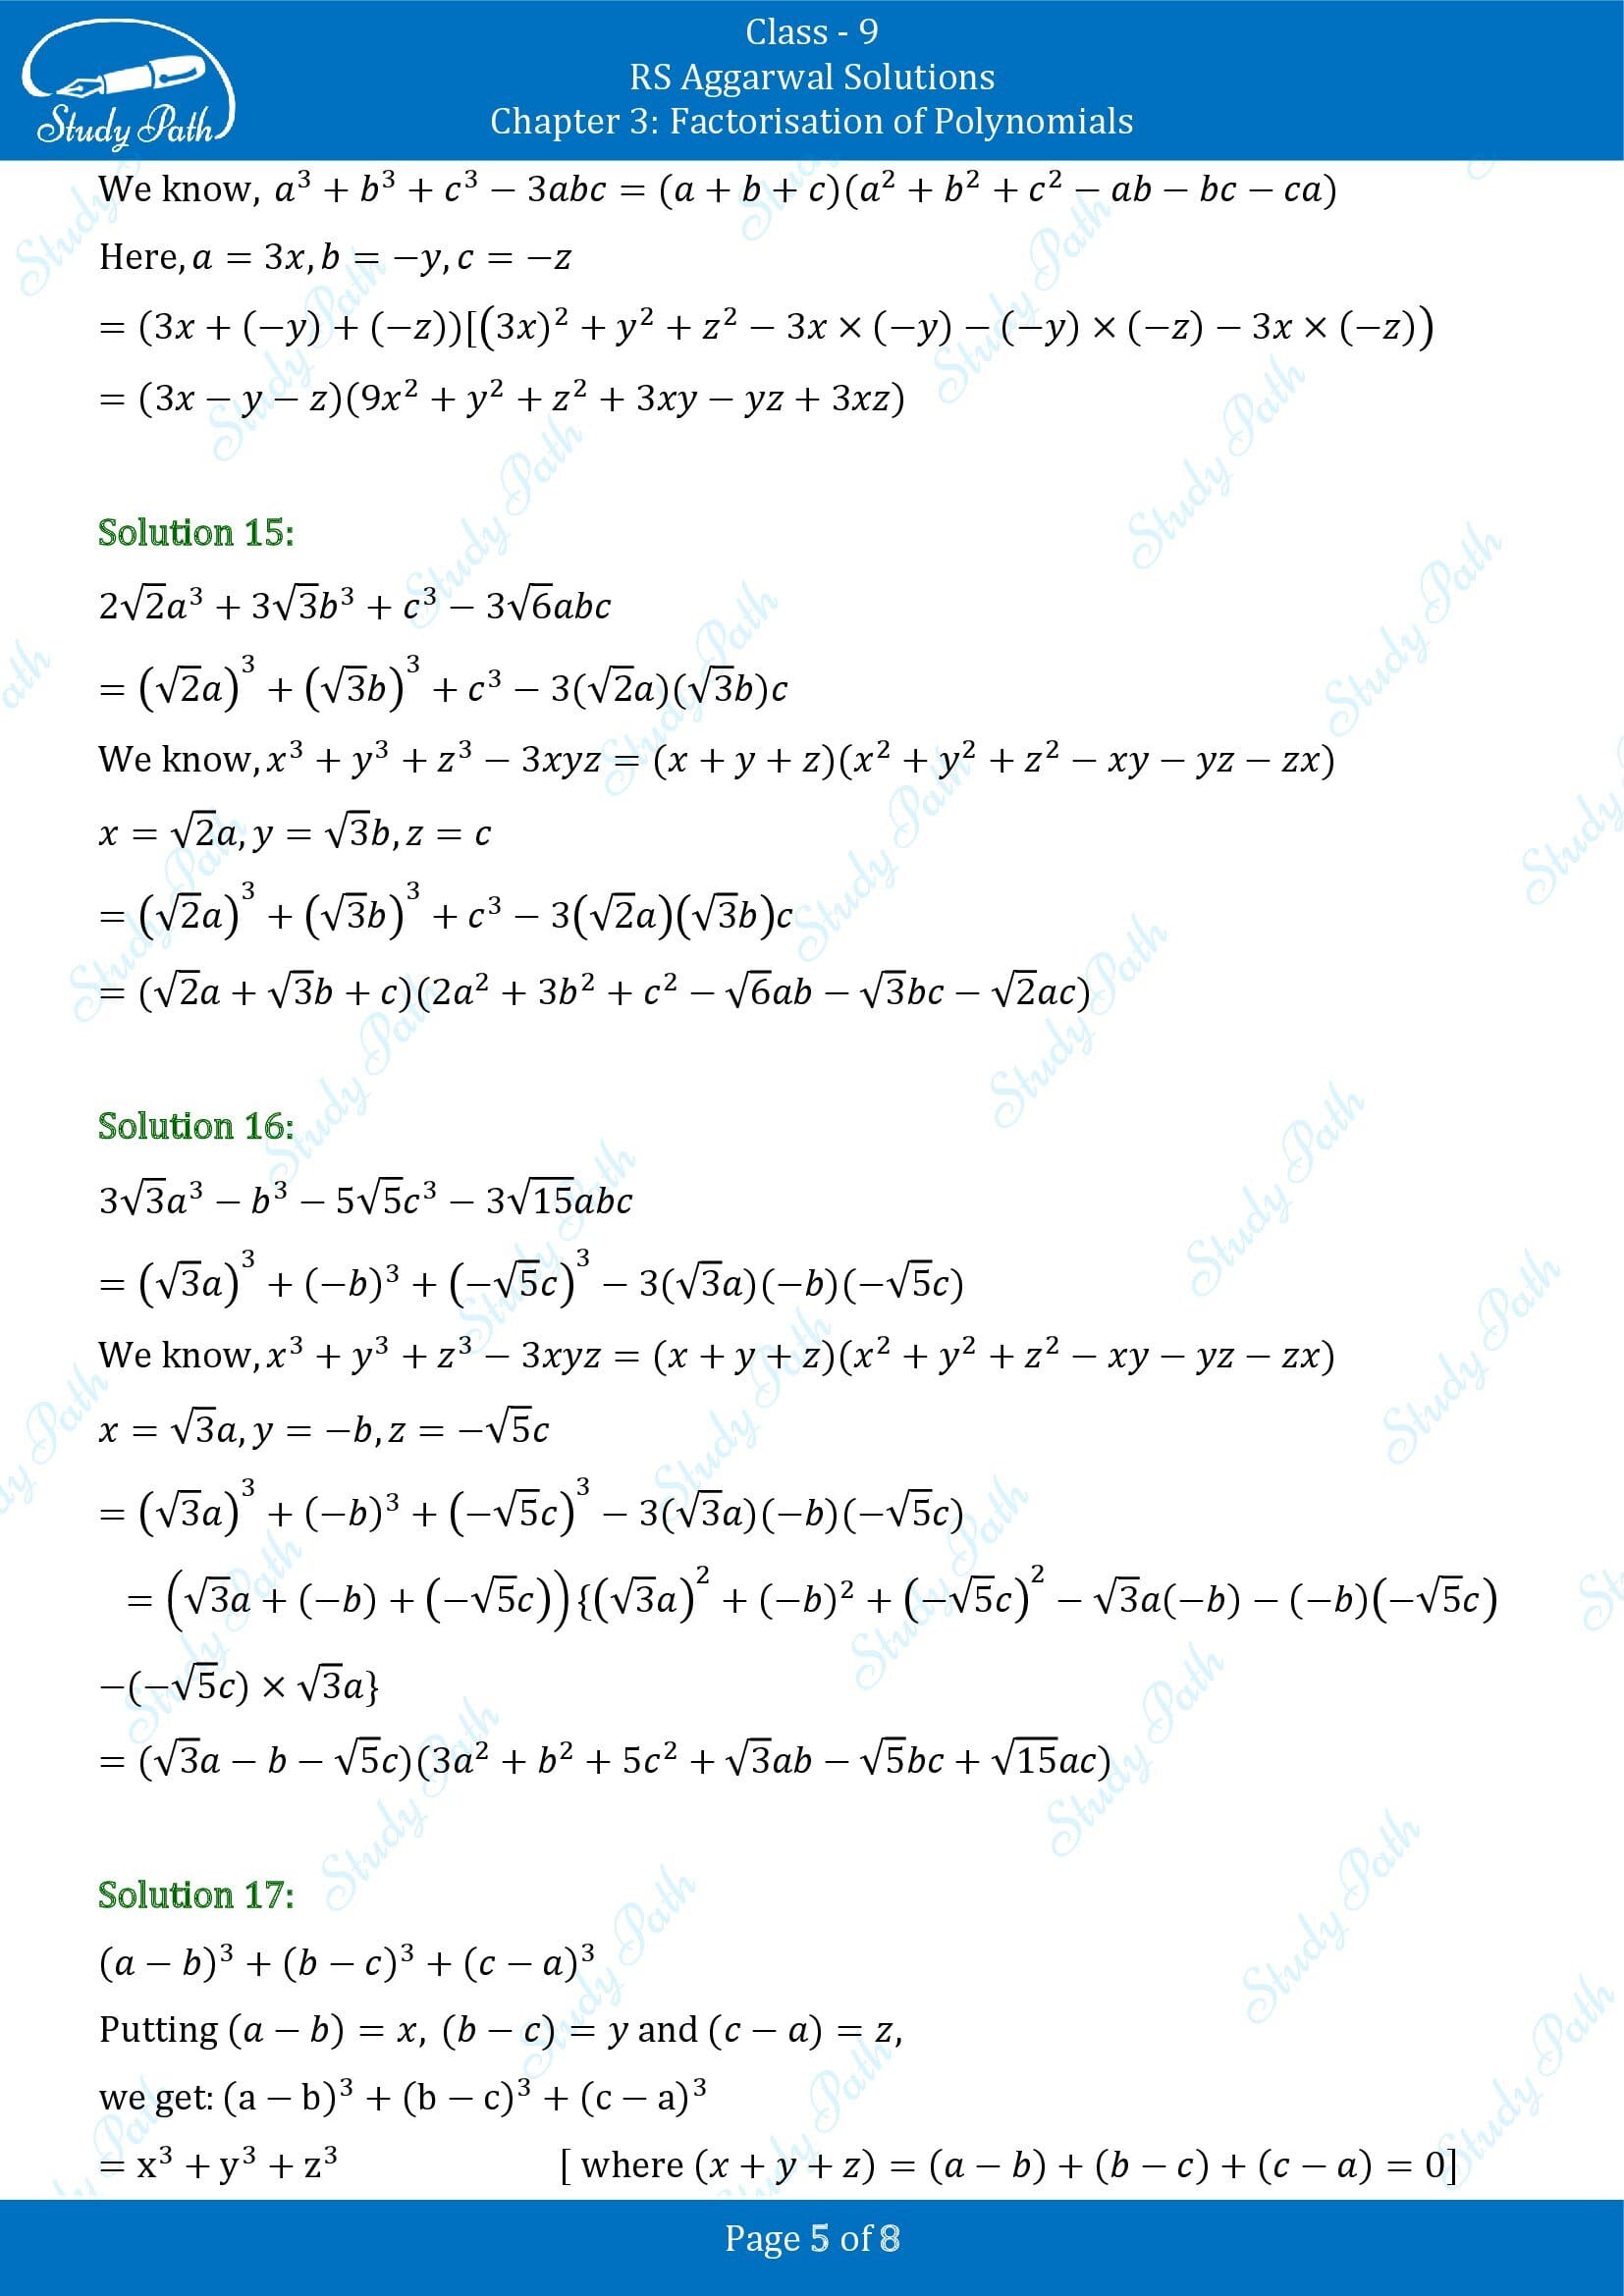 RS Aggarwal Solutions Class 9 Chapter 3 Factorisation of Polynomials Exercise 3G 0005